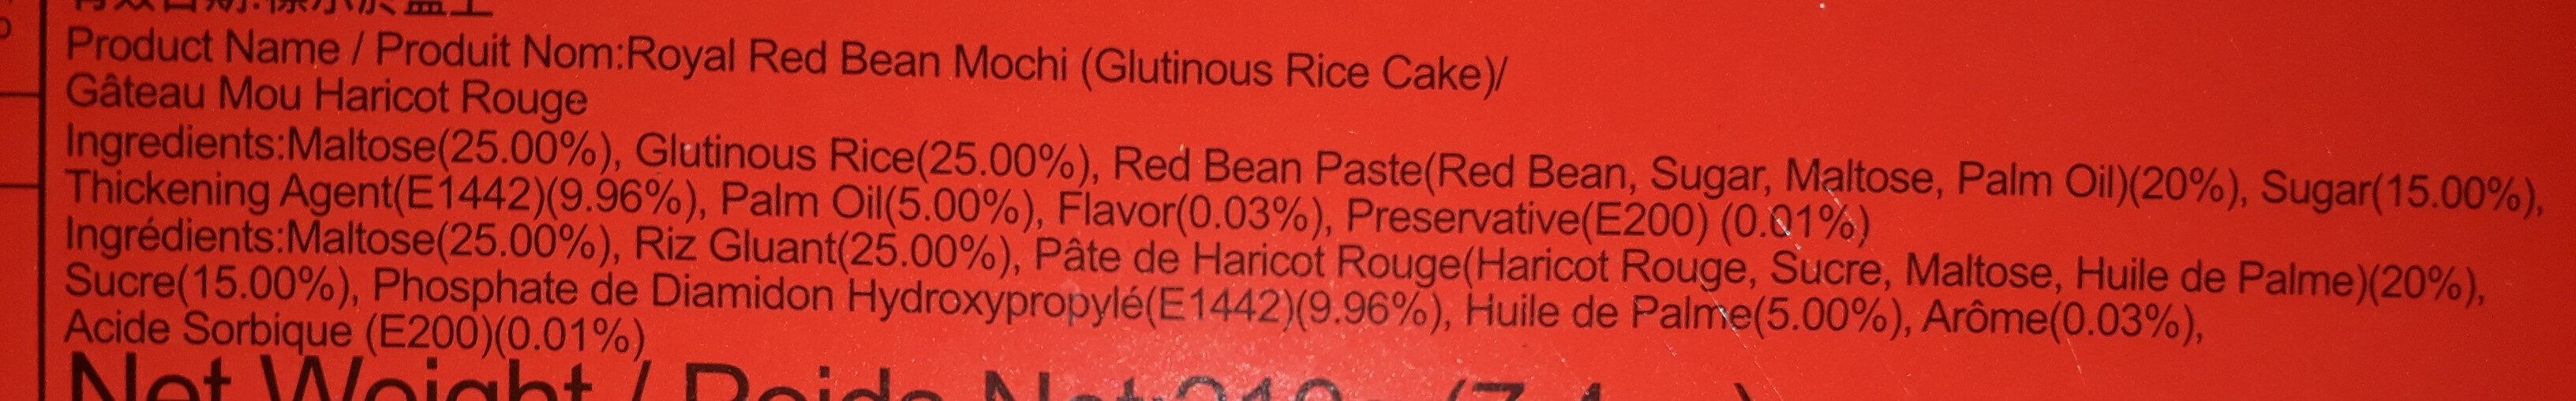 Mochi Haricot Rouge 210g - Ingredients